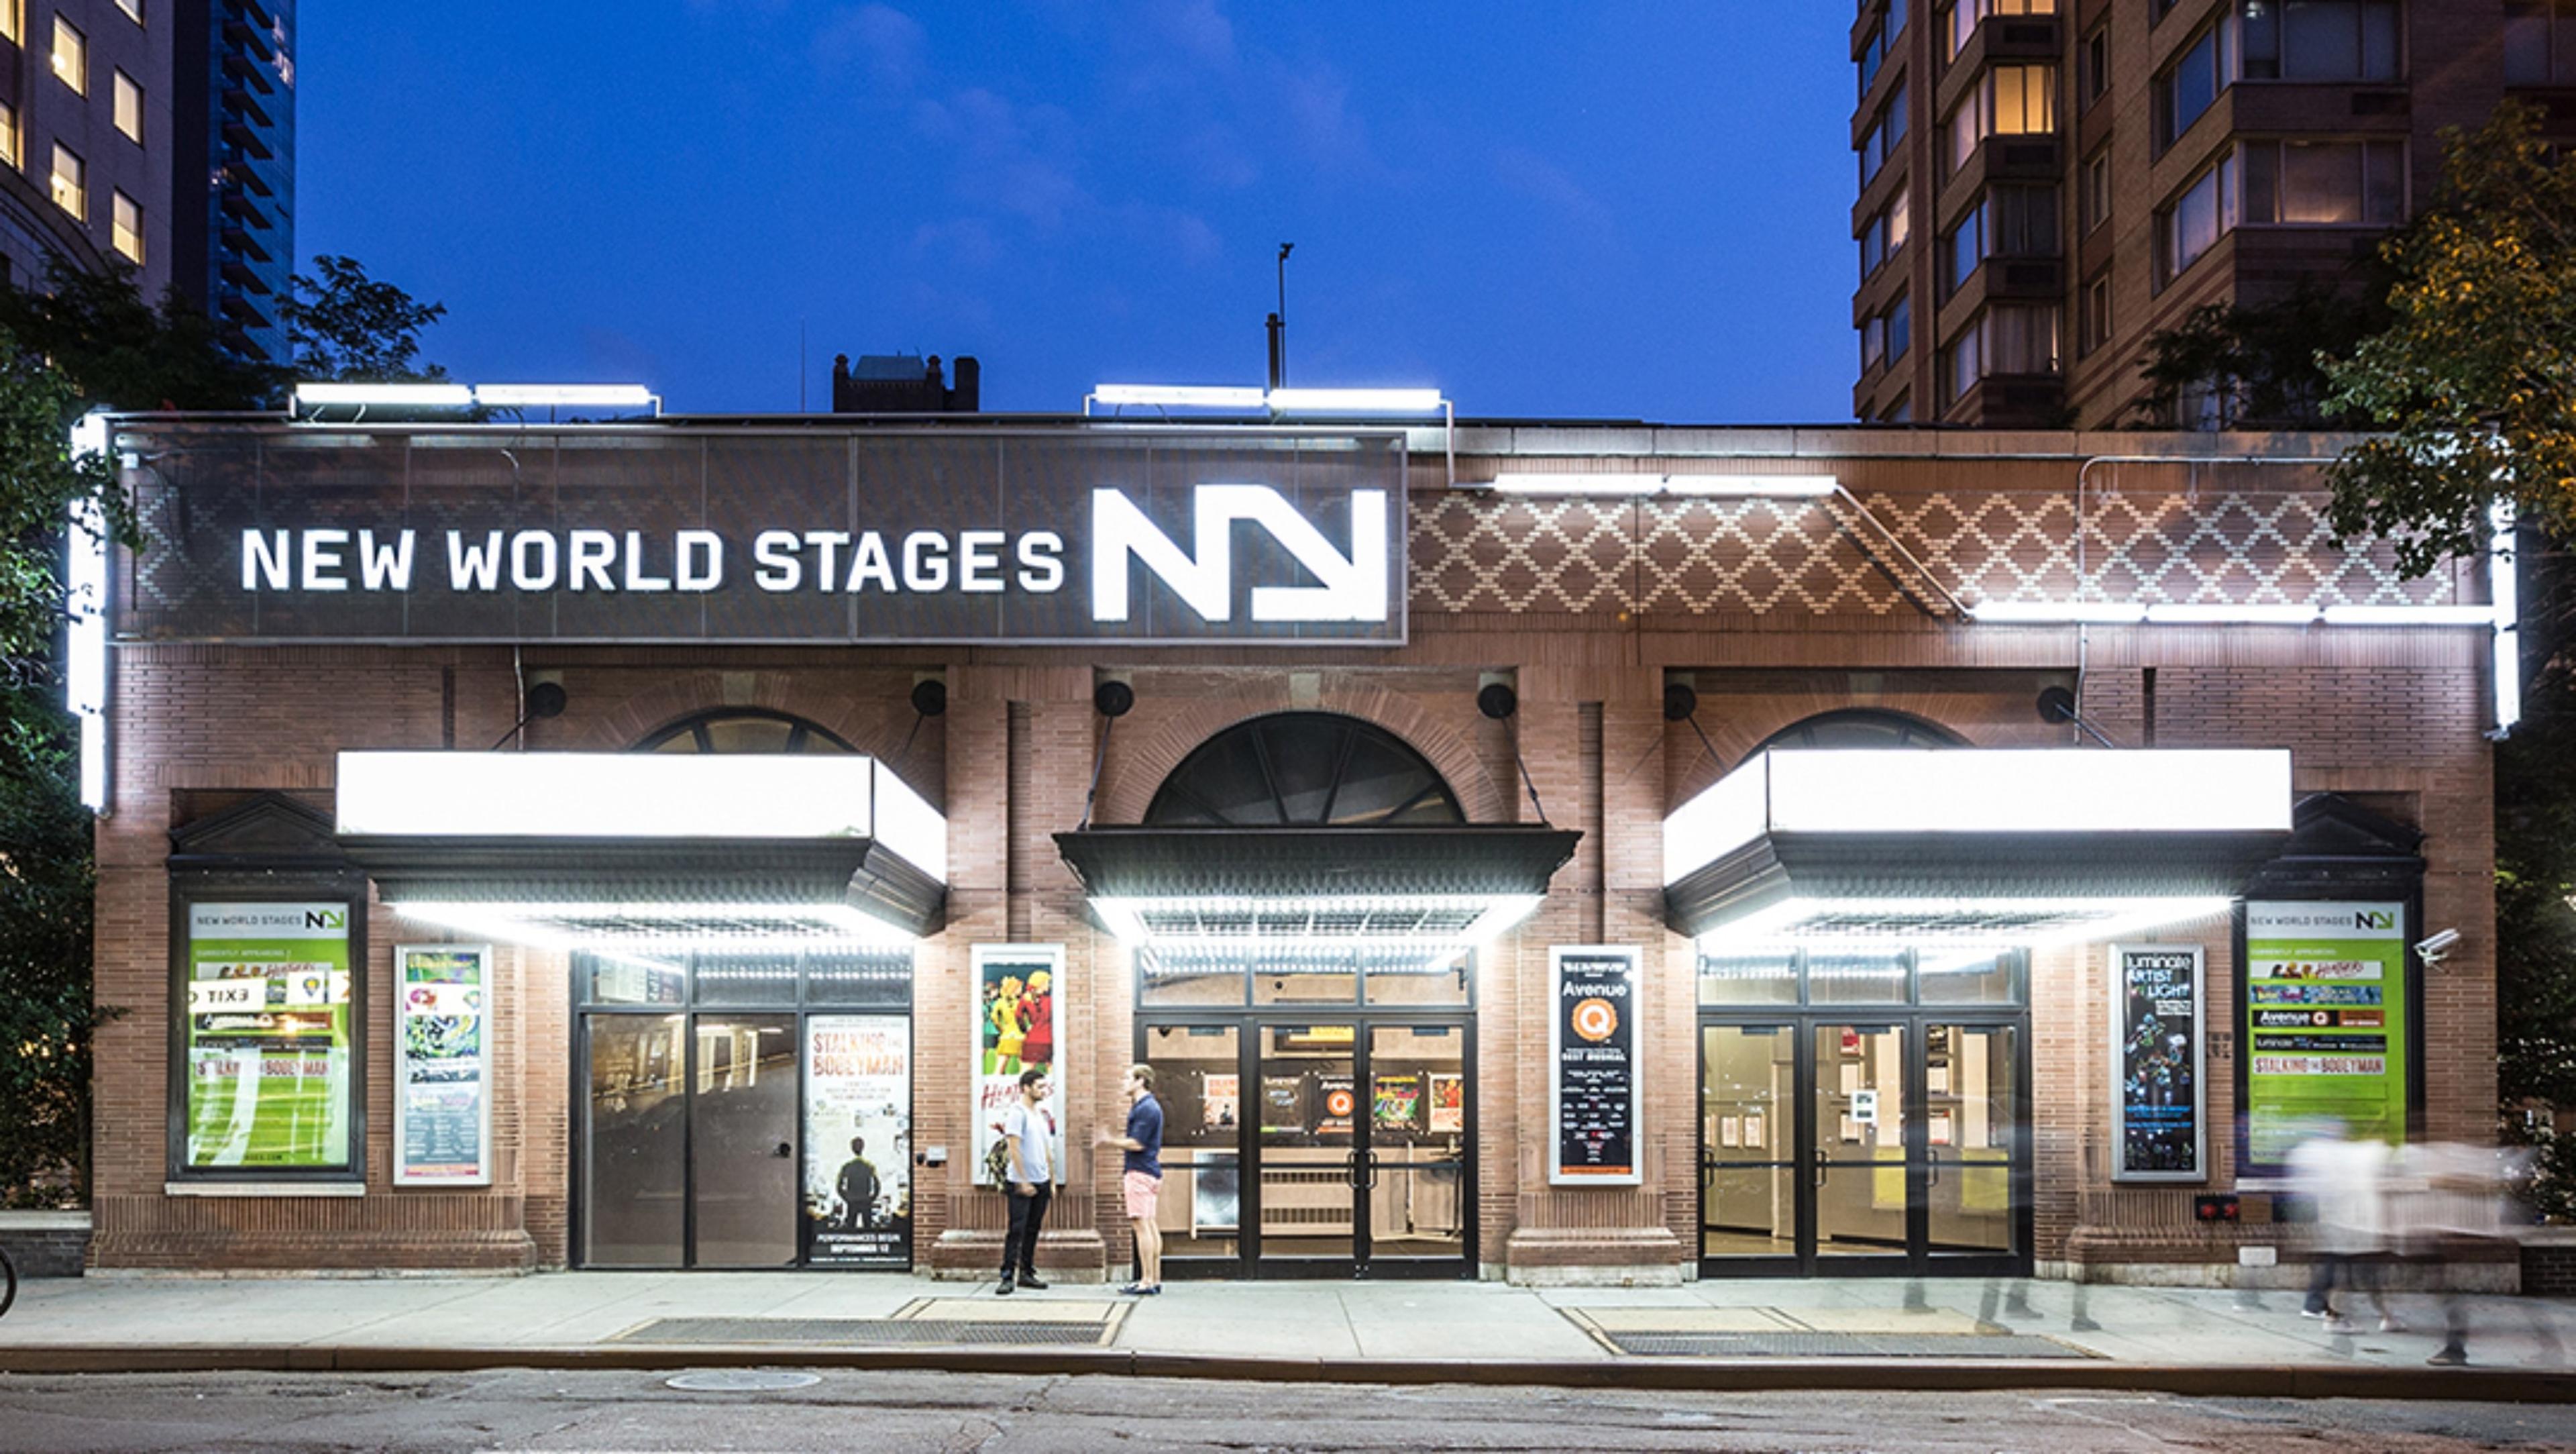 New World Stages